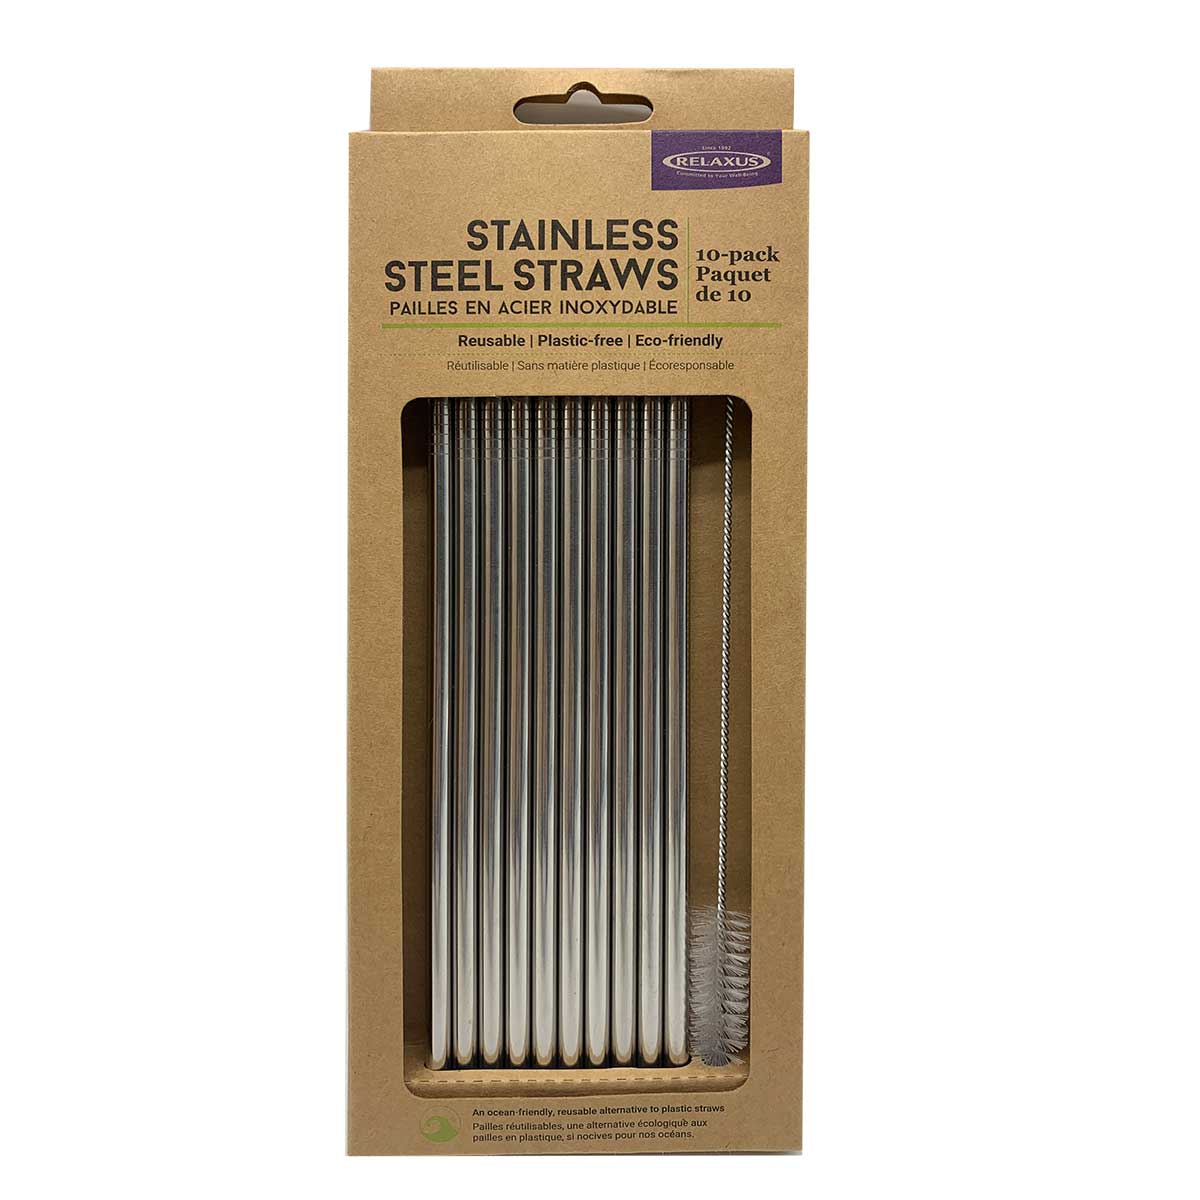 Buy Wholesale China Stainless Steel Straws Long Handle Spoon